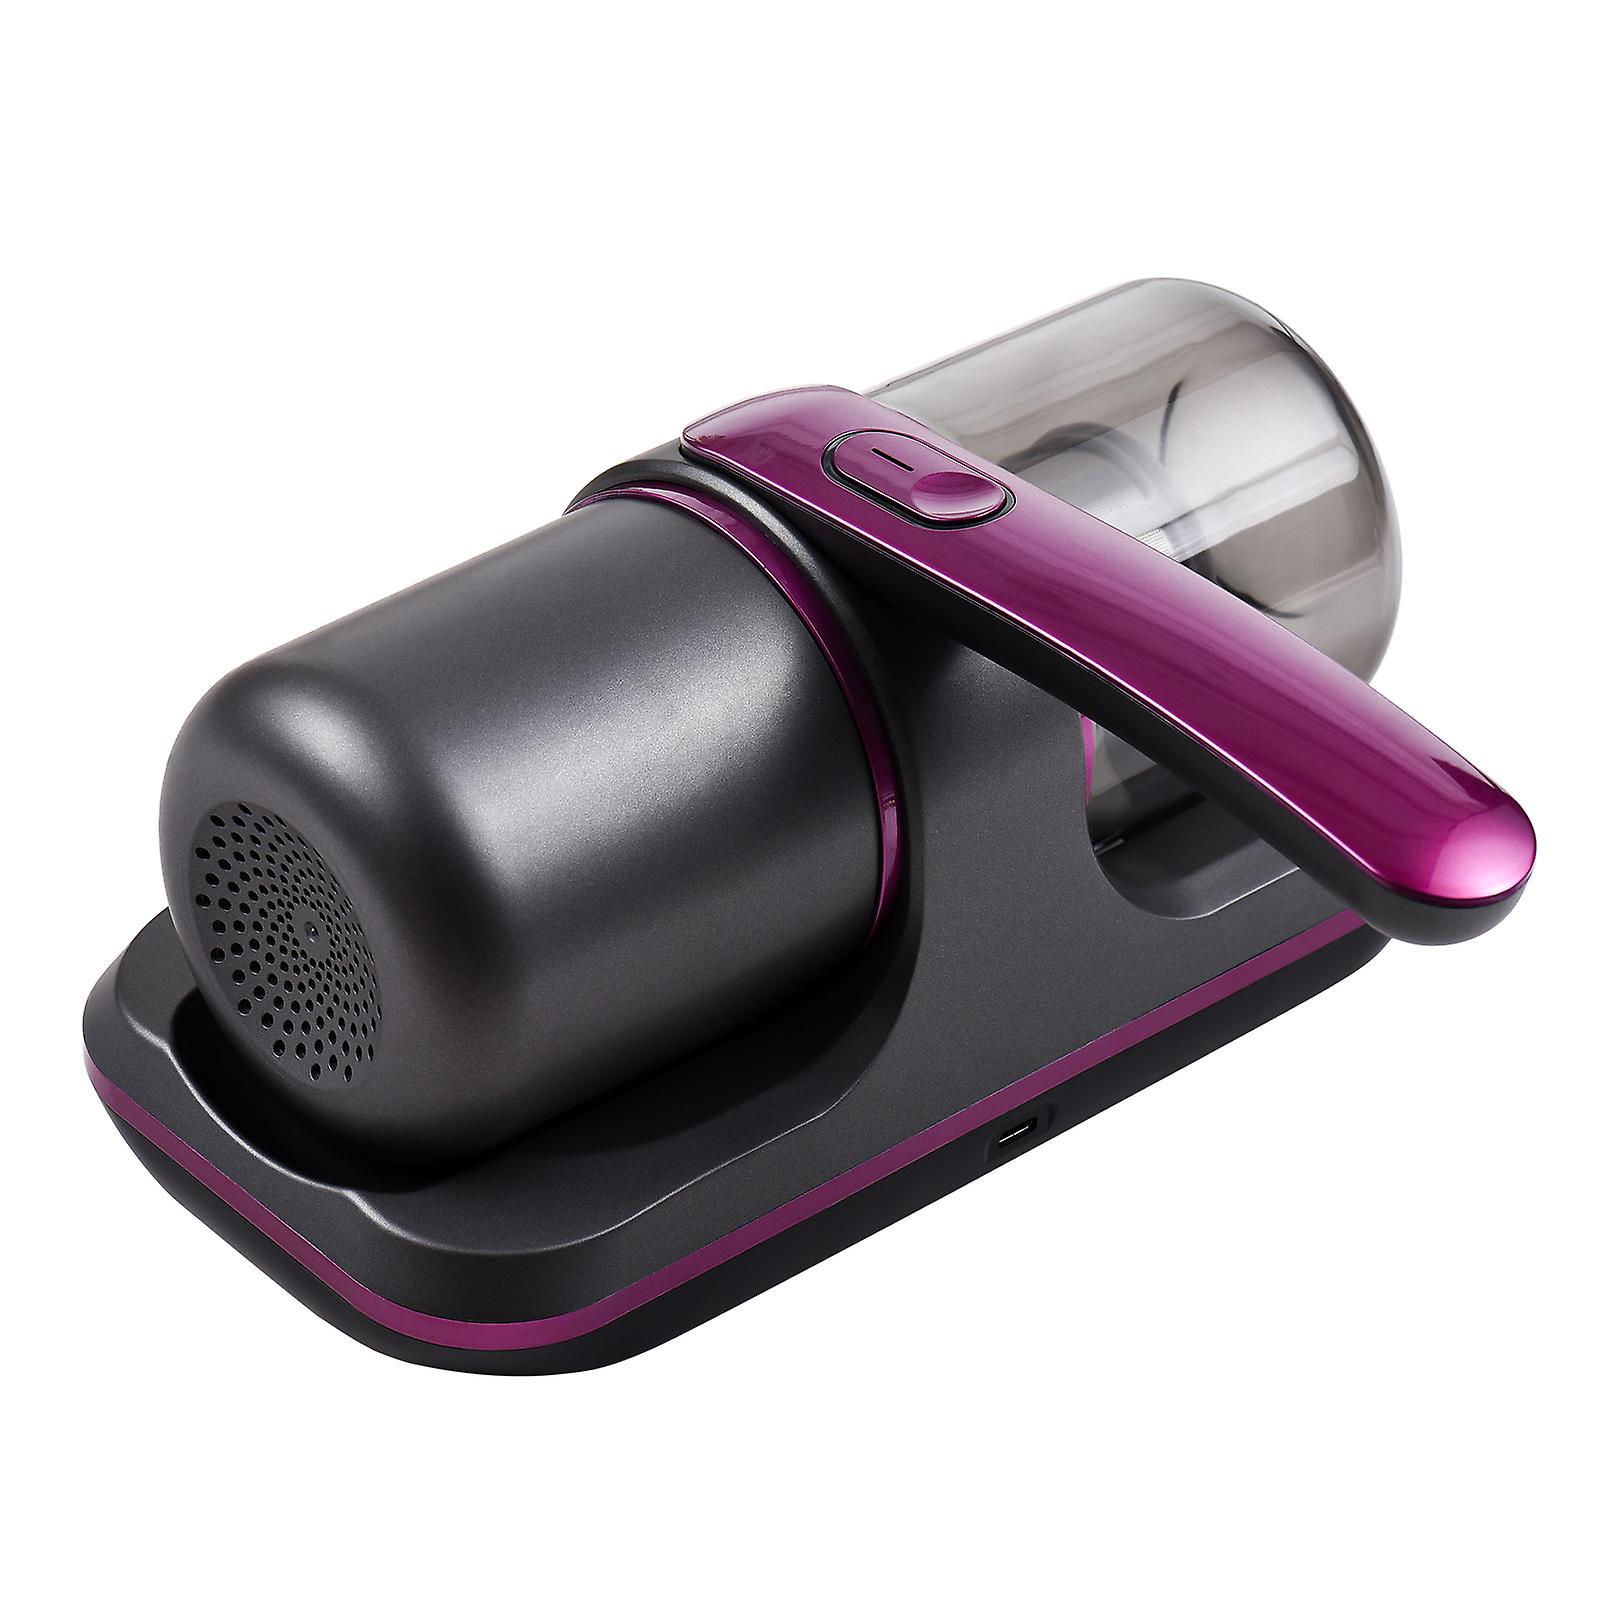 Portable Cordless Mite Removal Vacuum Cleaner with Enhanced Suction